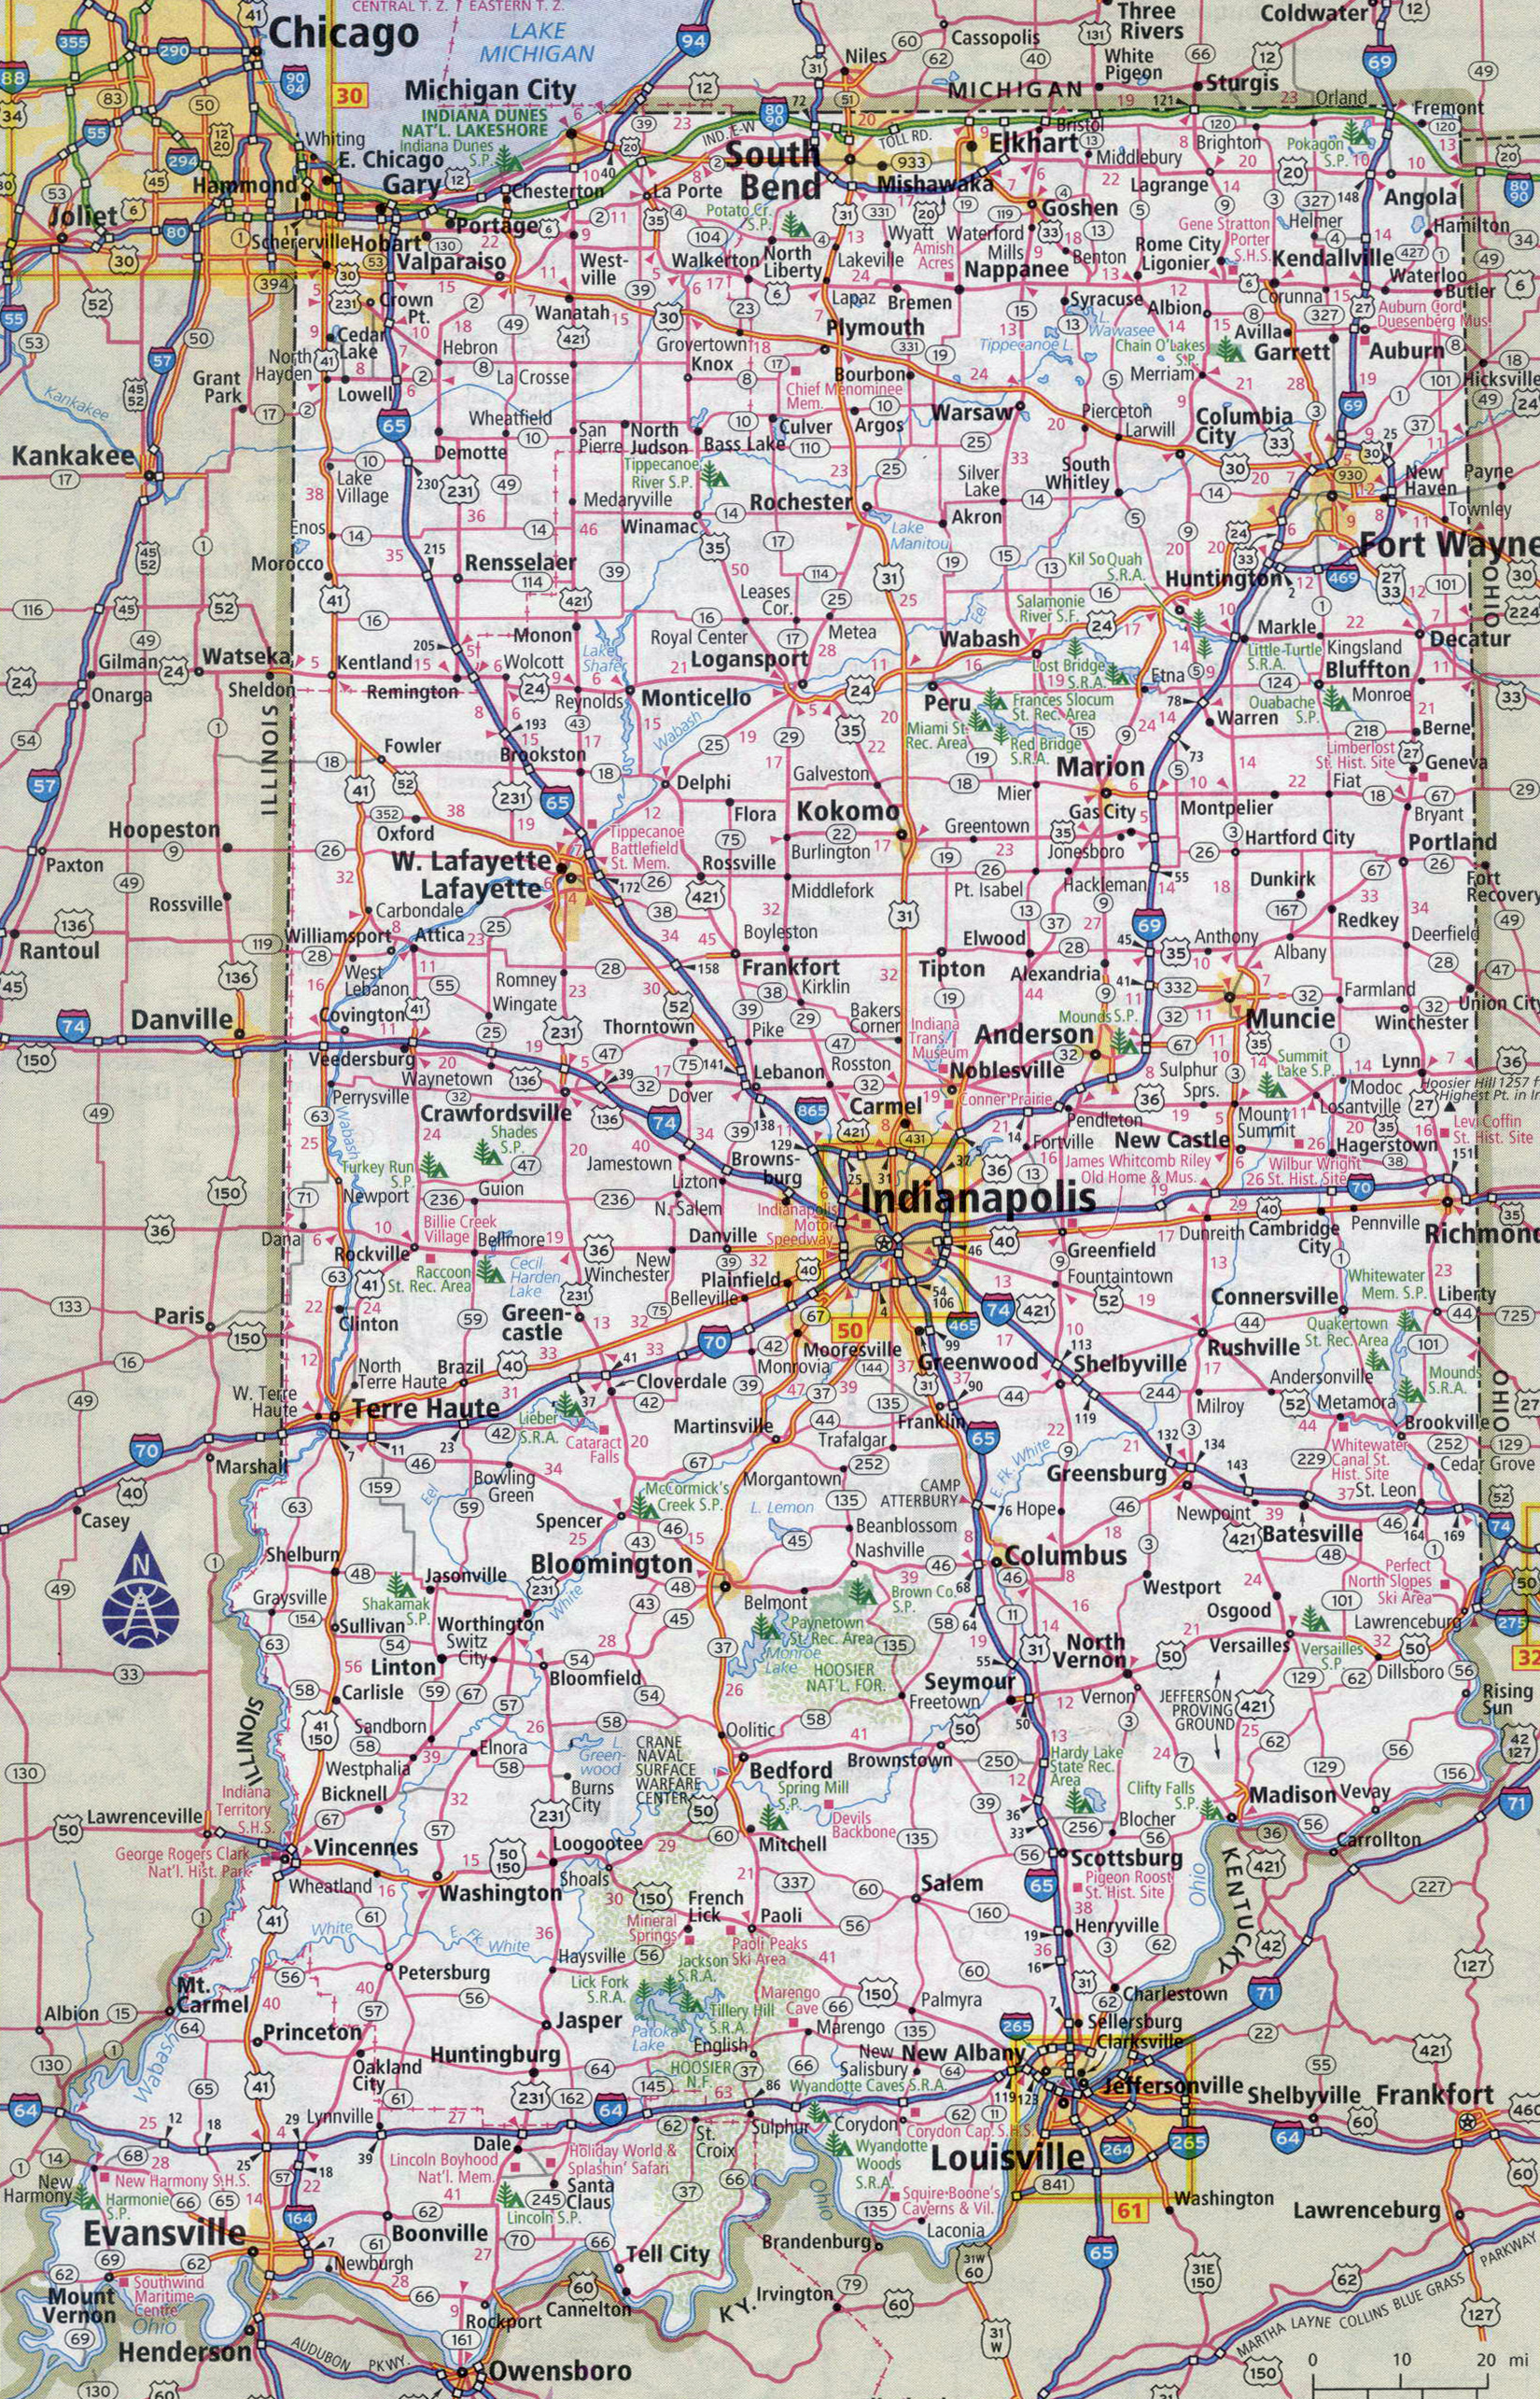 Indiana State Highway Map Large Detailed Roads And Highways Map Of Indiana State With All Cities | Indiana  State | Usa | Maps Of The Usa | Maps Collection Of The United States Of  America